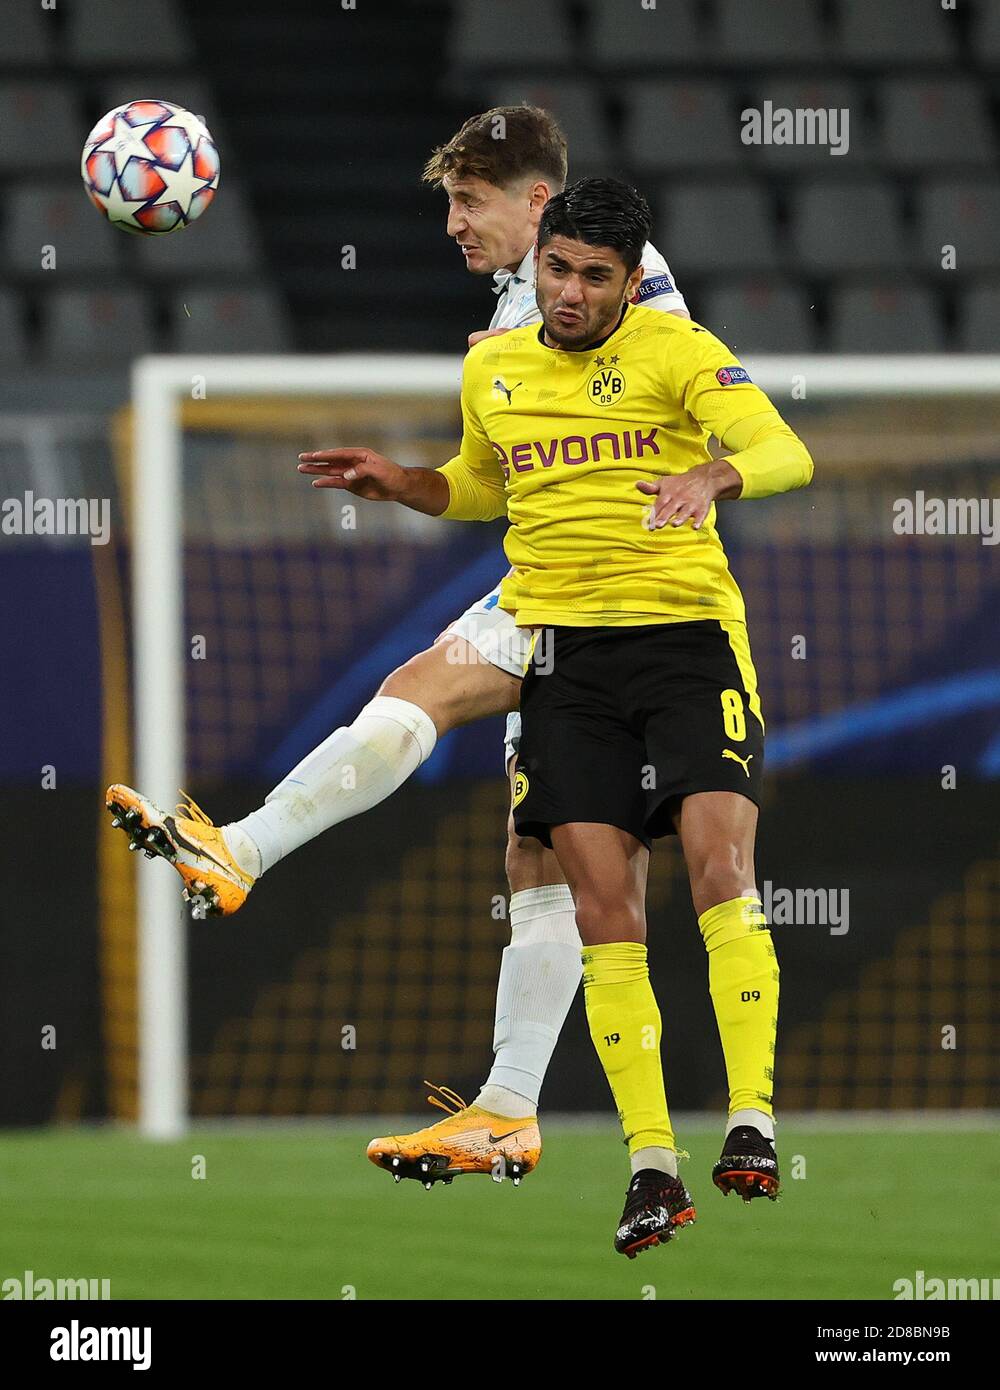 Dortmund, Germany. 28th Oct, 2020. Mahmoud Dahoud (front) of Dortmund vies for a header with Daler Kuzyayev of Zenit during the UEFA Champions League Group F football match between Borussia Dortmund and FC Zenit in Dortmund, Germany, Oct. 28, 2020. Credit: Joachim Bywaletz/Xinhua/Alamy Live News Stock Photo